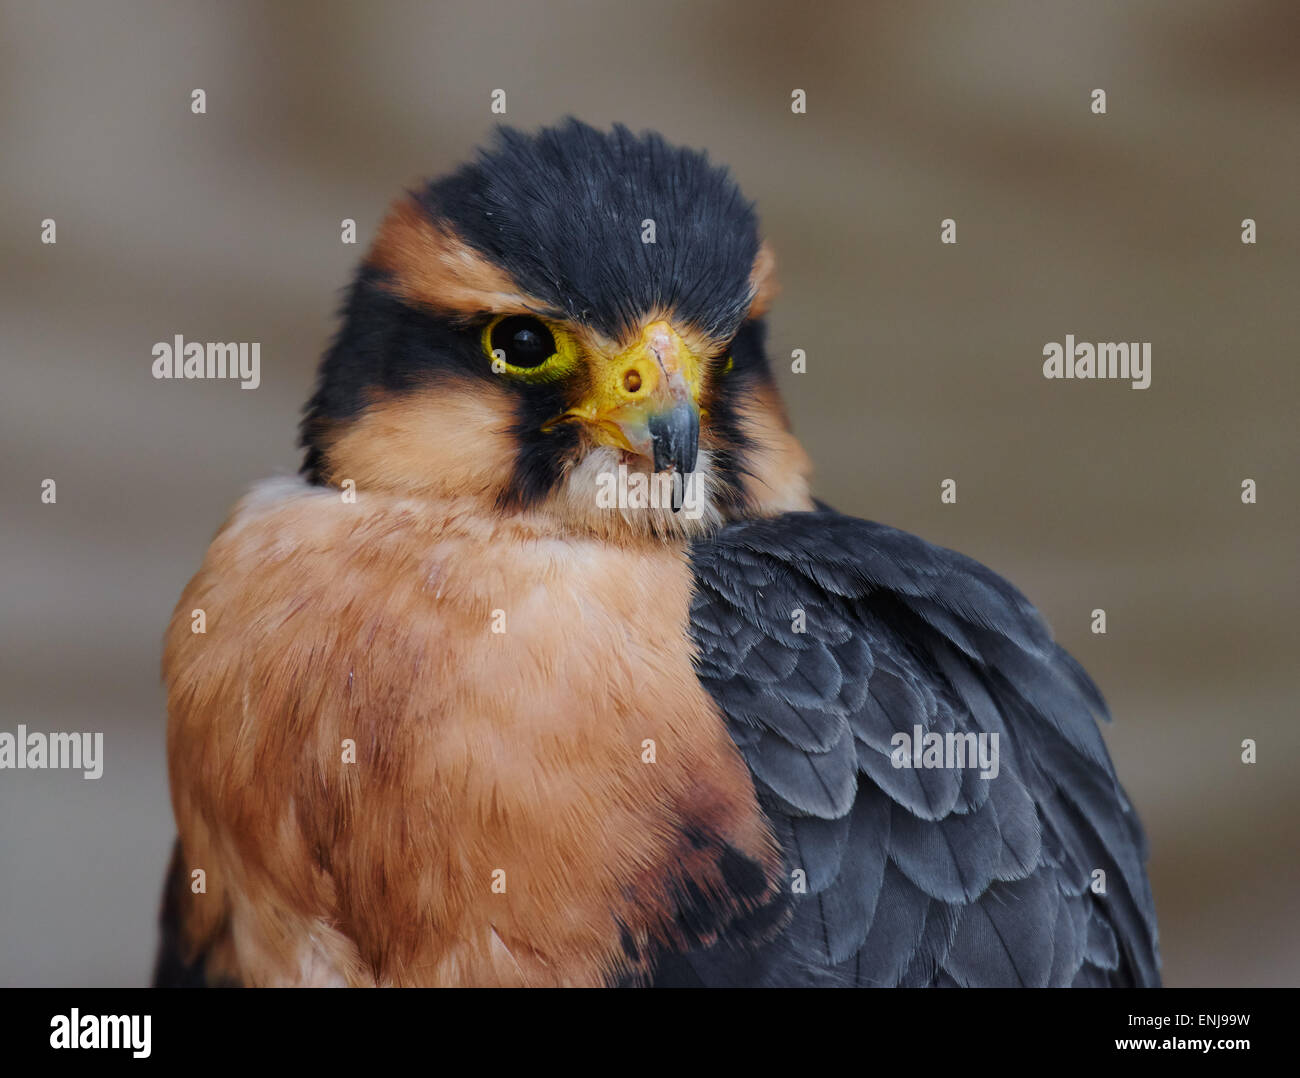 Common Kestrel Perched on log Stock Photo